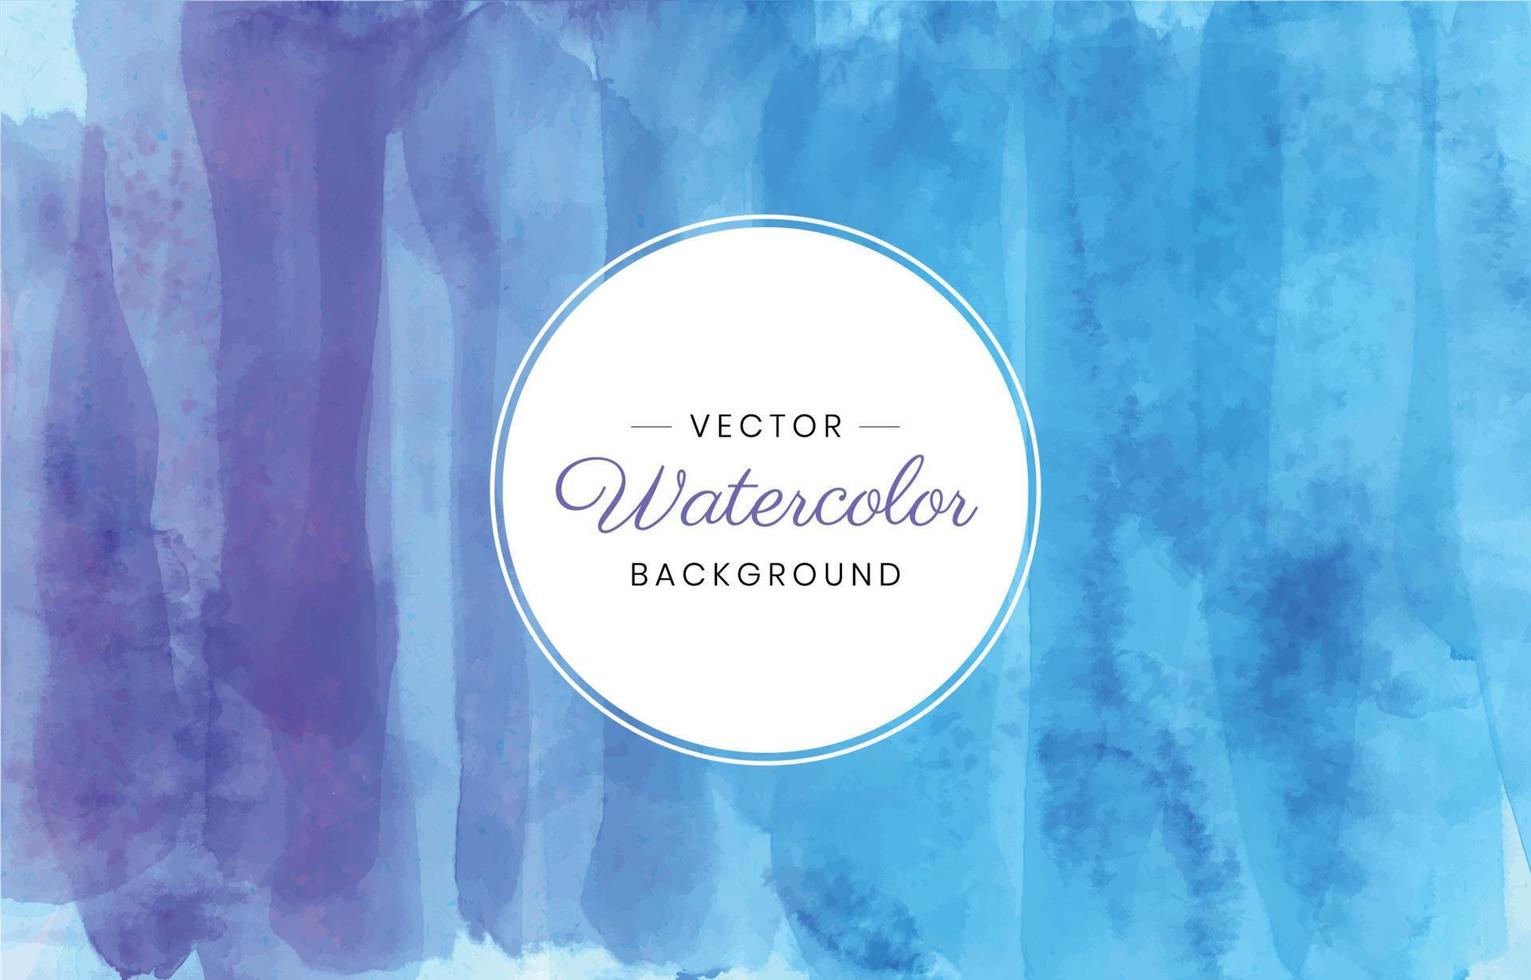 Blue and Purple Watercolor Texture with Brushstrokes vector